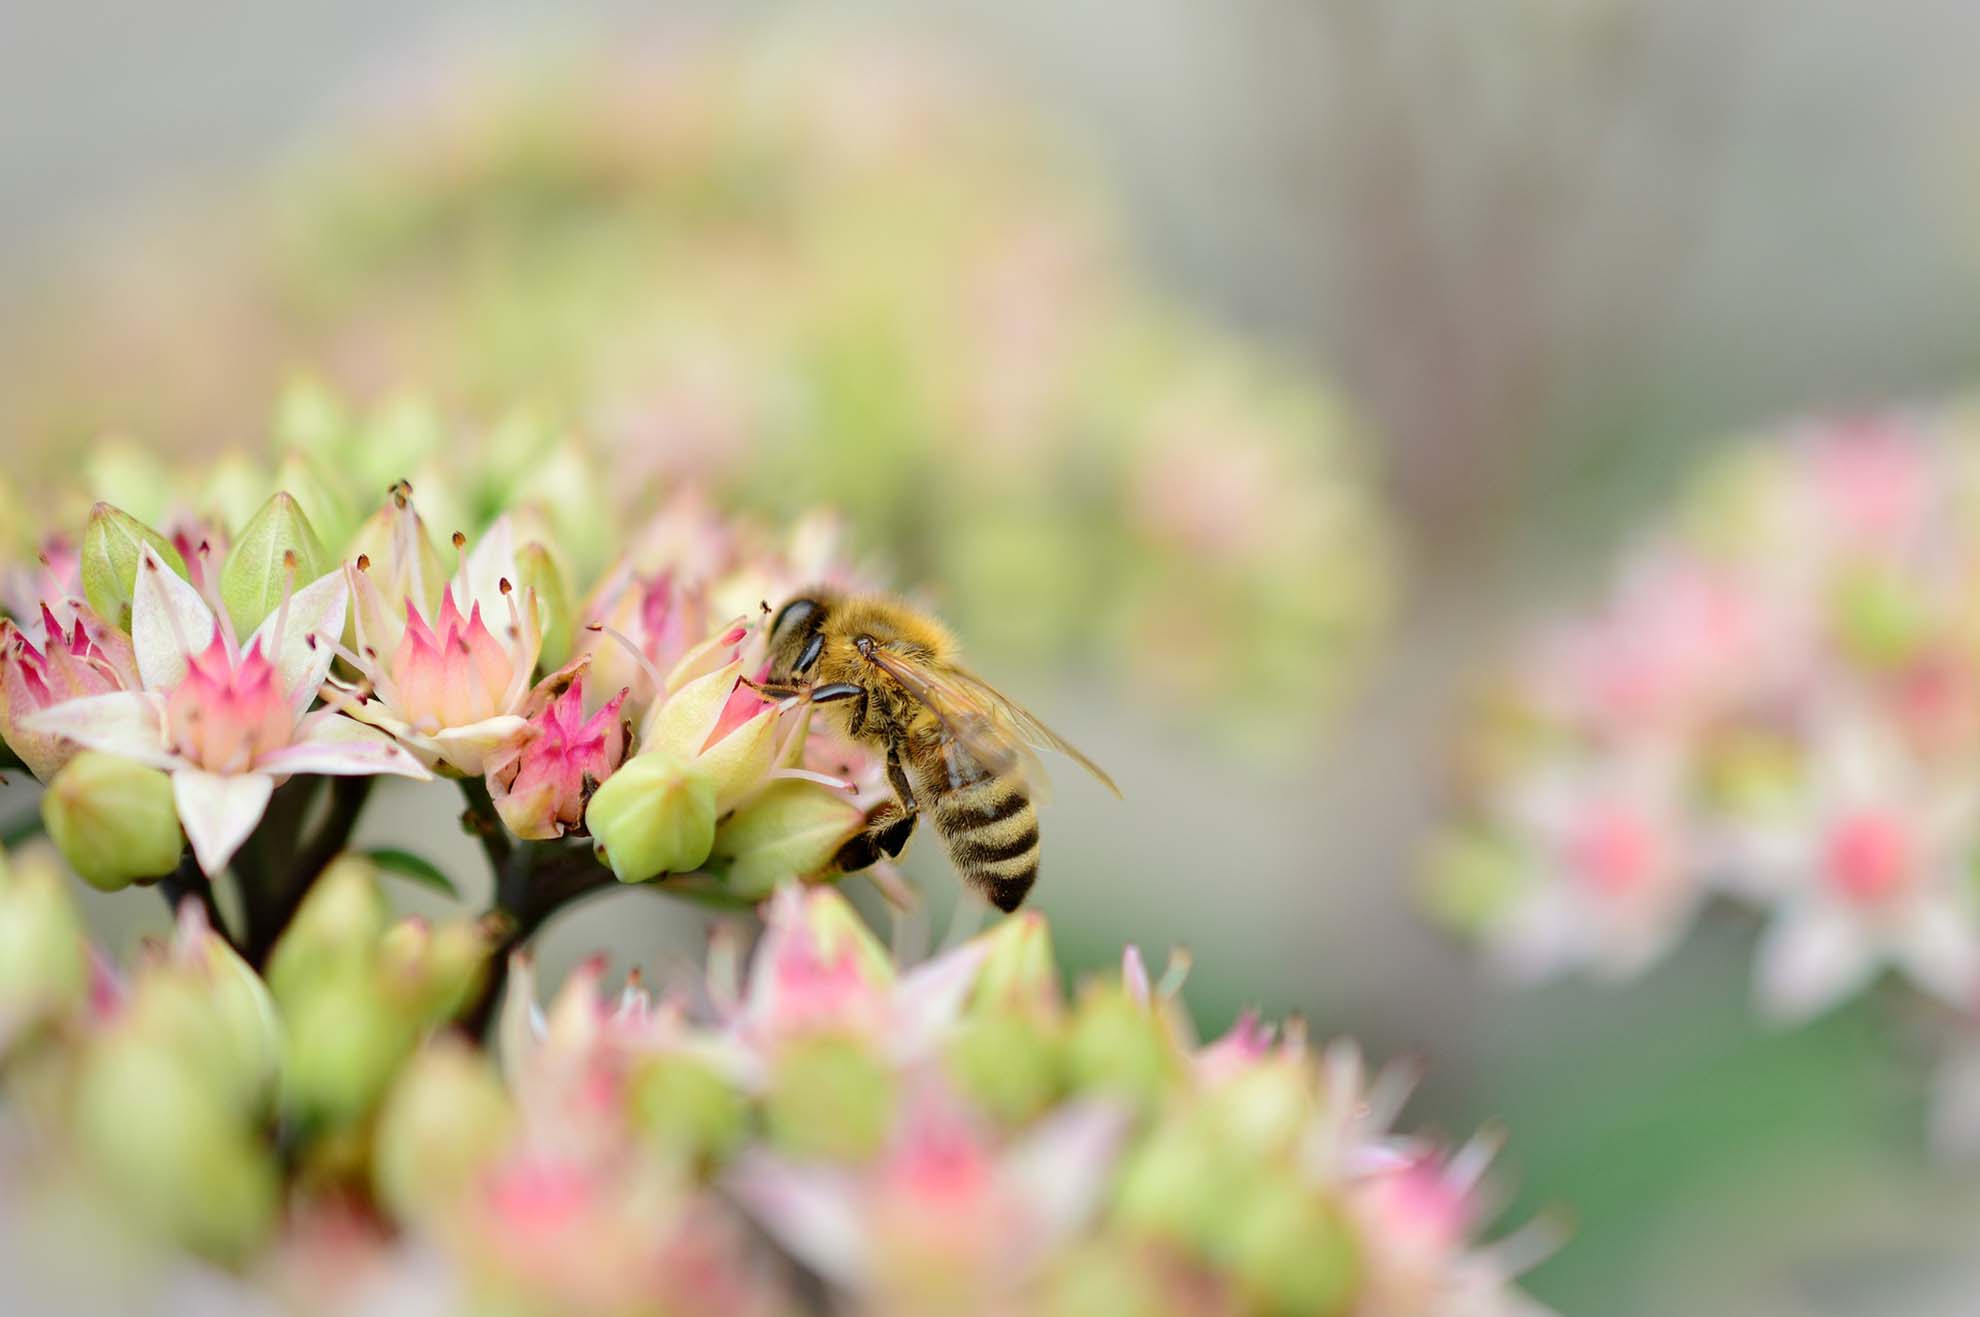 Bees on a pink and green flower.